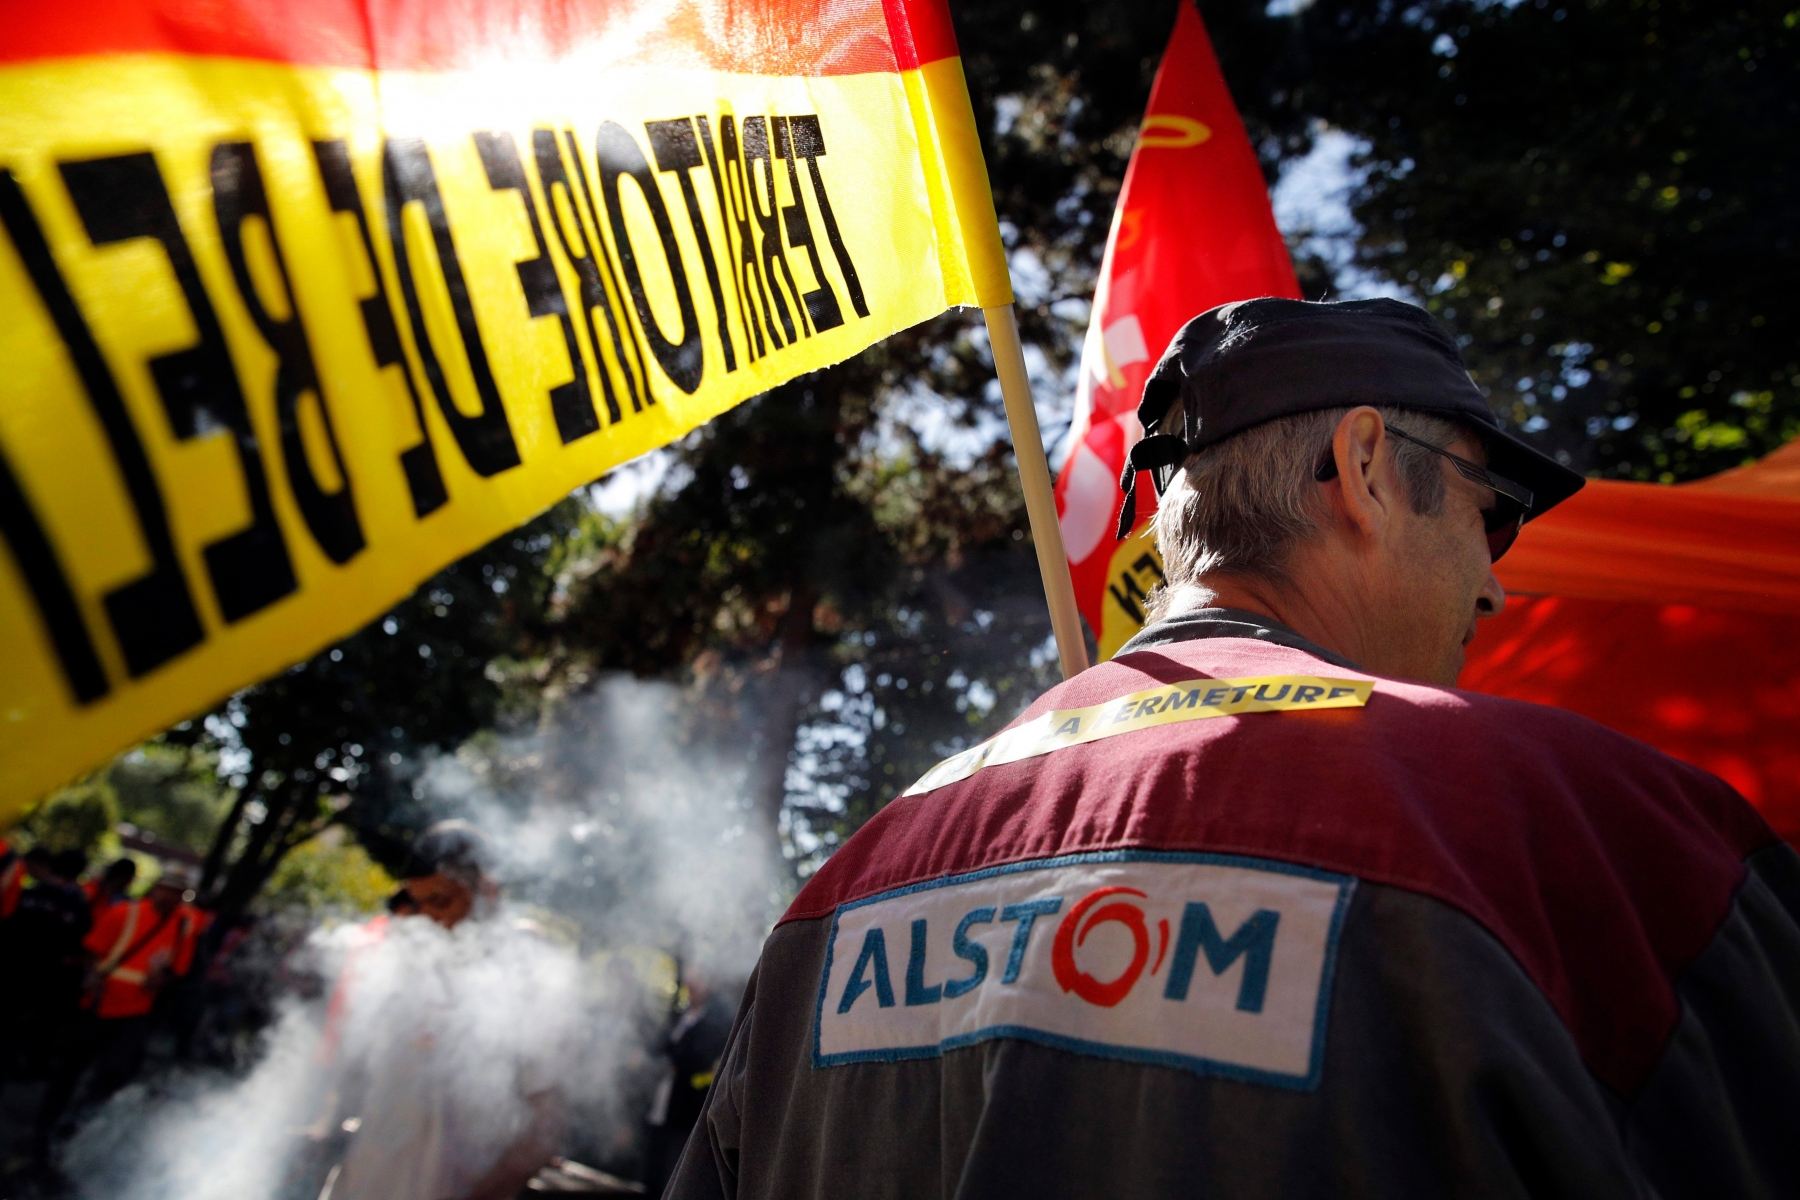 Alstom employers stage a protest in front of its headquarters in St Ouen, north of Paris, asking not to close a plant in Belfort, eastern France, which employs 400 people, Tuesday, Sept. 27, 2016. Alstom's situation is considered by many French politicians as symbolic of France's difficulty of keeping a strong industry at home. (AP Photo/Christophe Ena) France Alstom